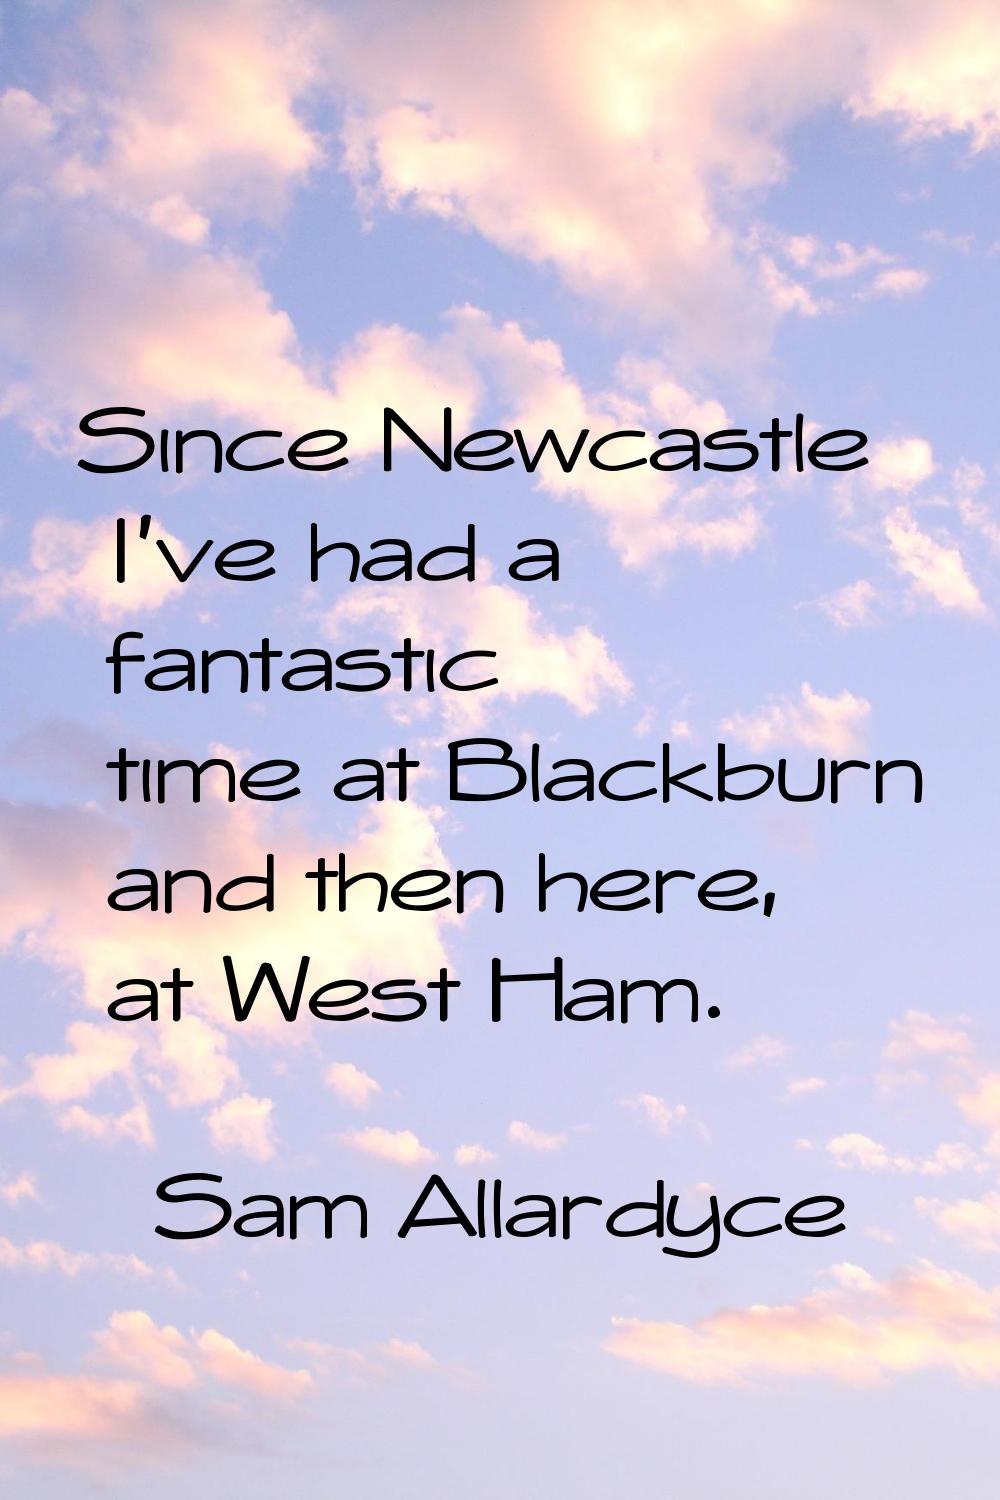 Since Newcastle I've had a fantastic time at Blackburn and then here, at West Ham.